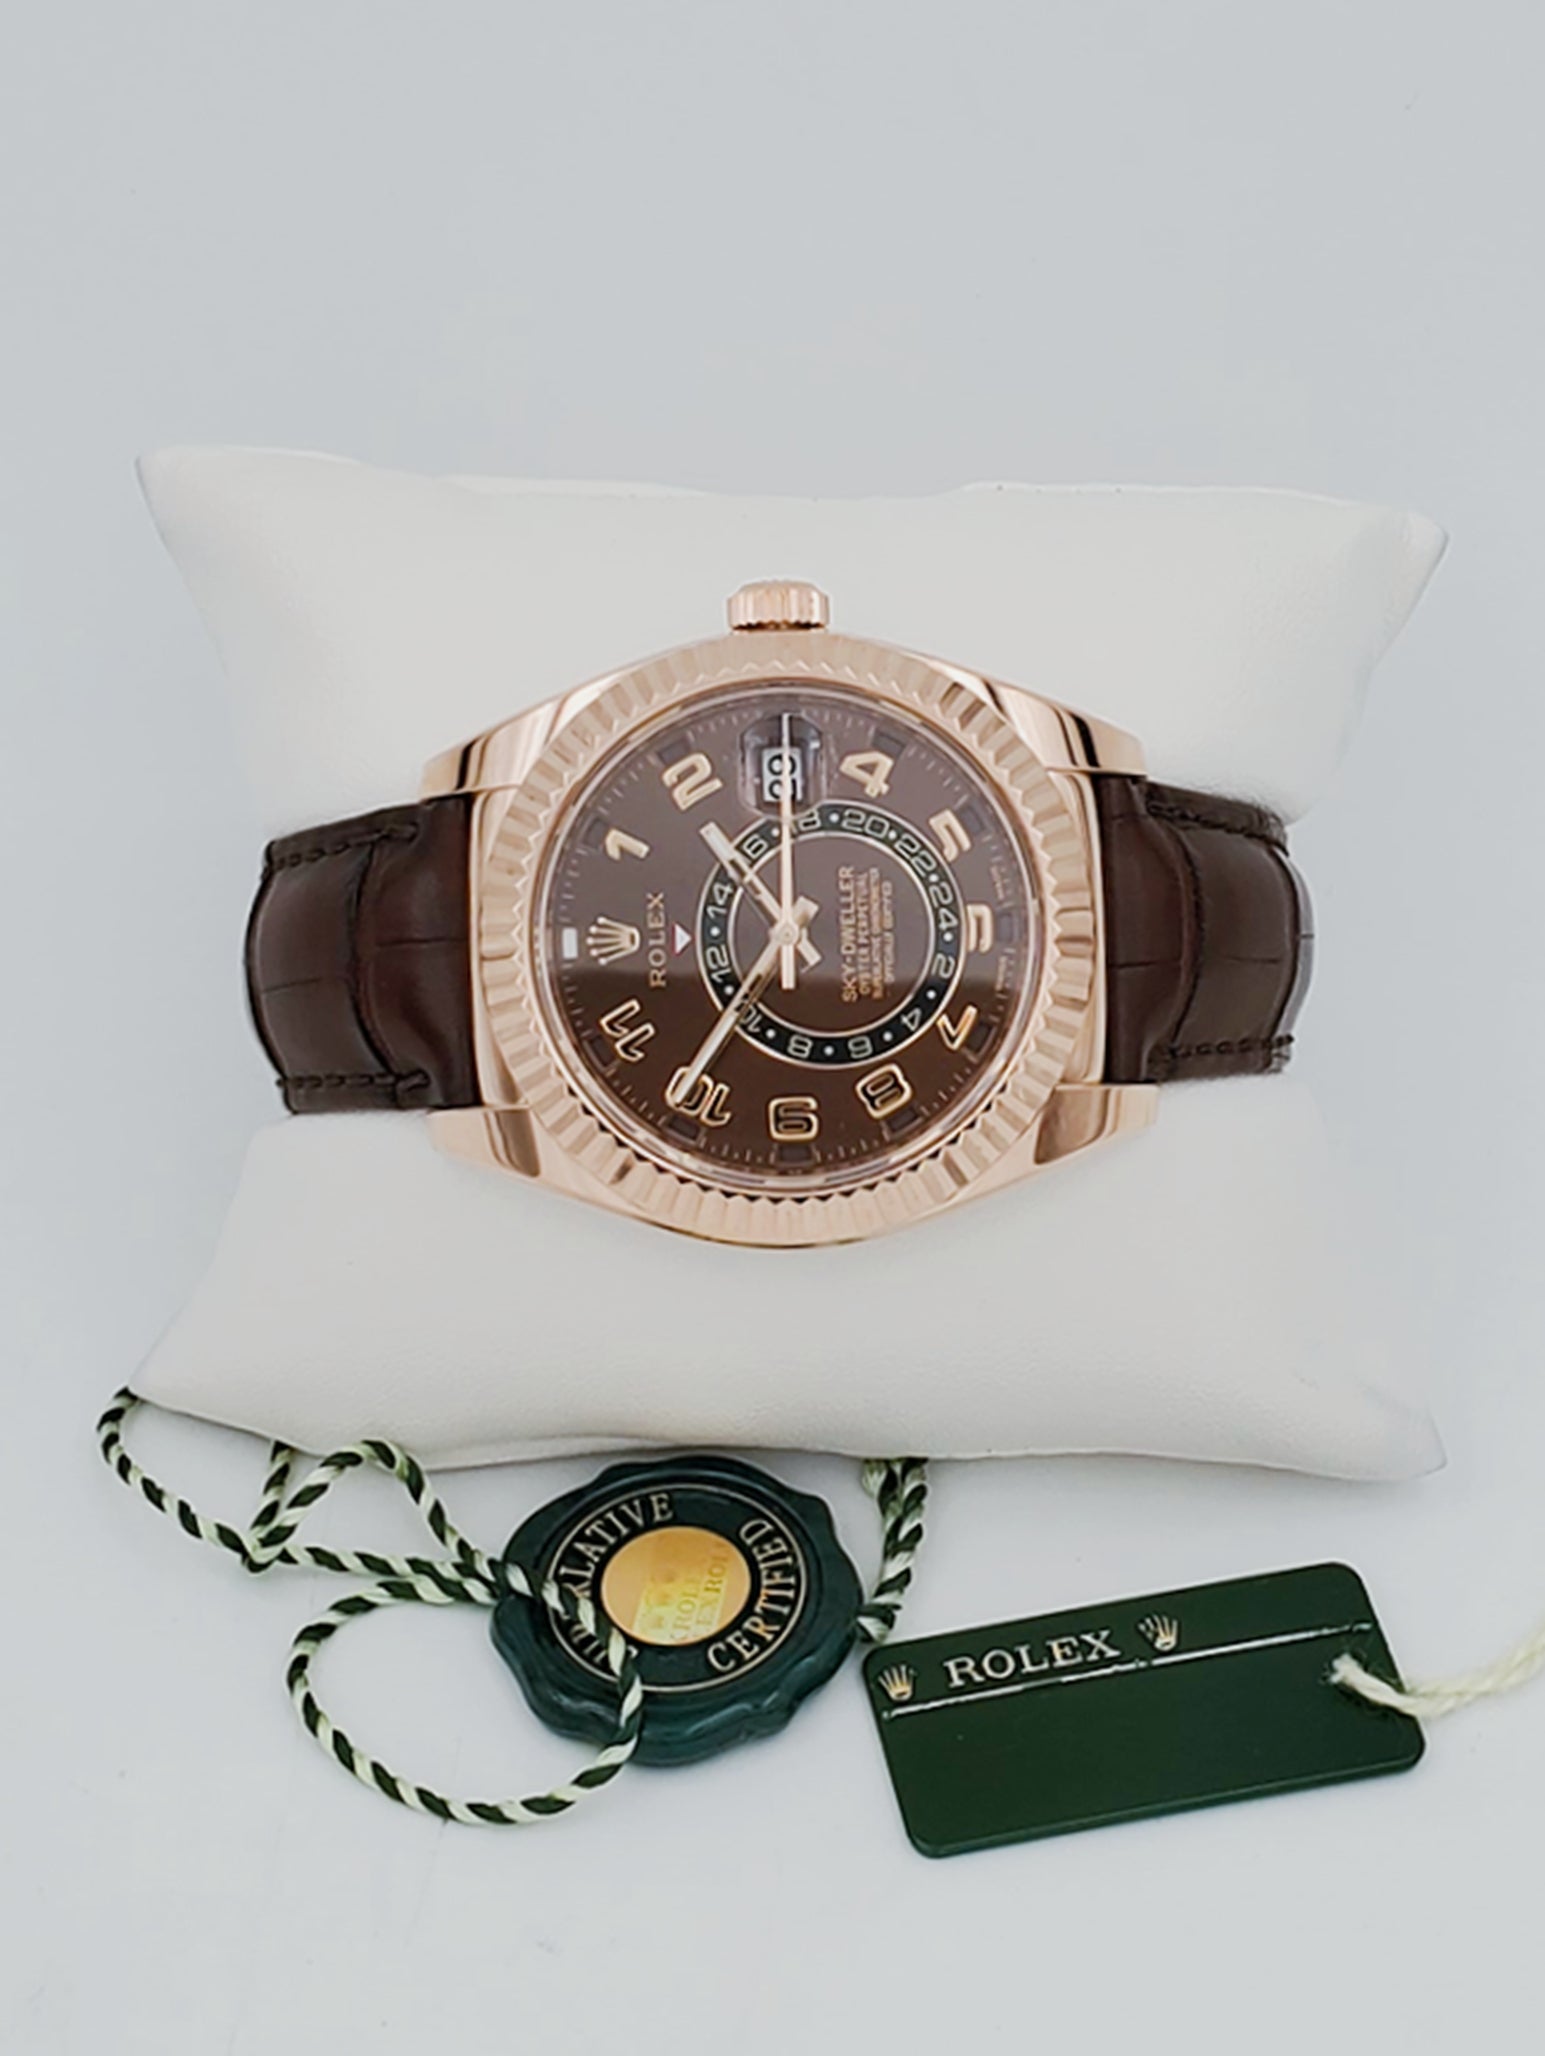 Men's Rolex 42mm Sky-Dweller Oyster Perpetual Watch with 18K Everose Gold, Chocolate Dial and Brown Leather Bracelet. (NEW 326135)